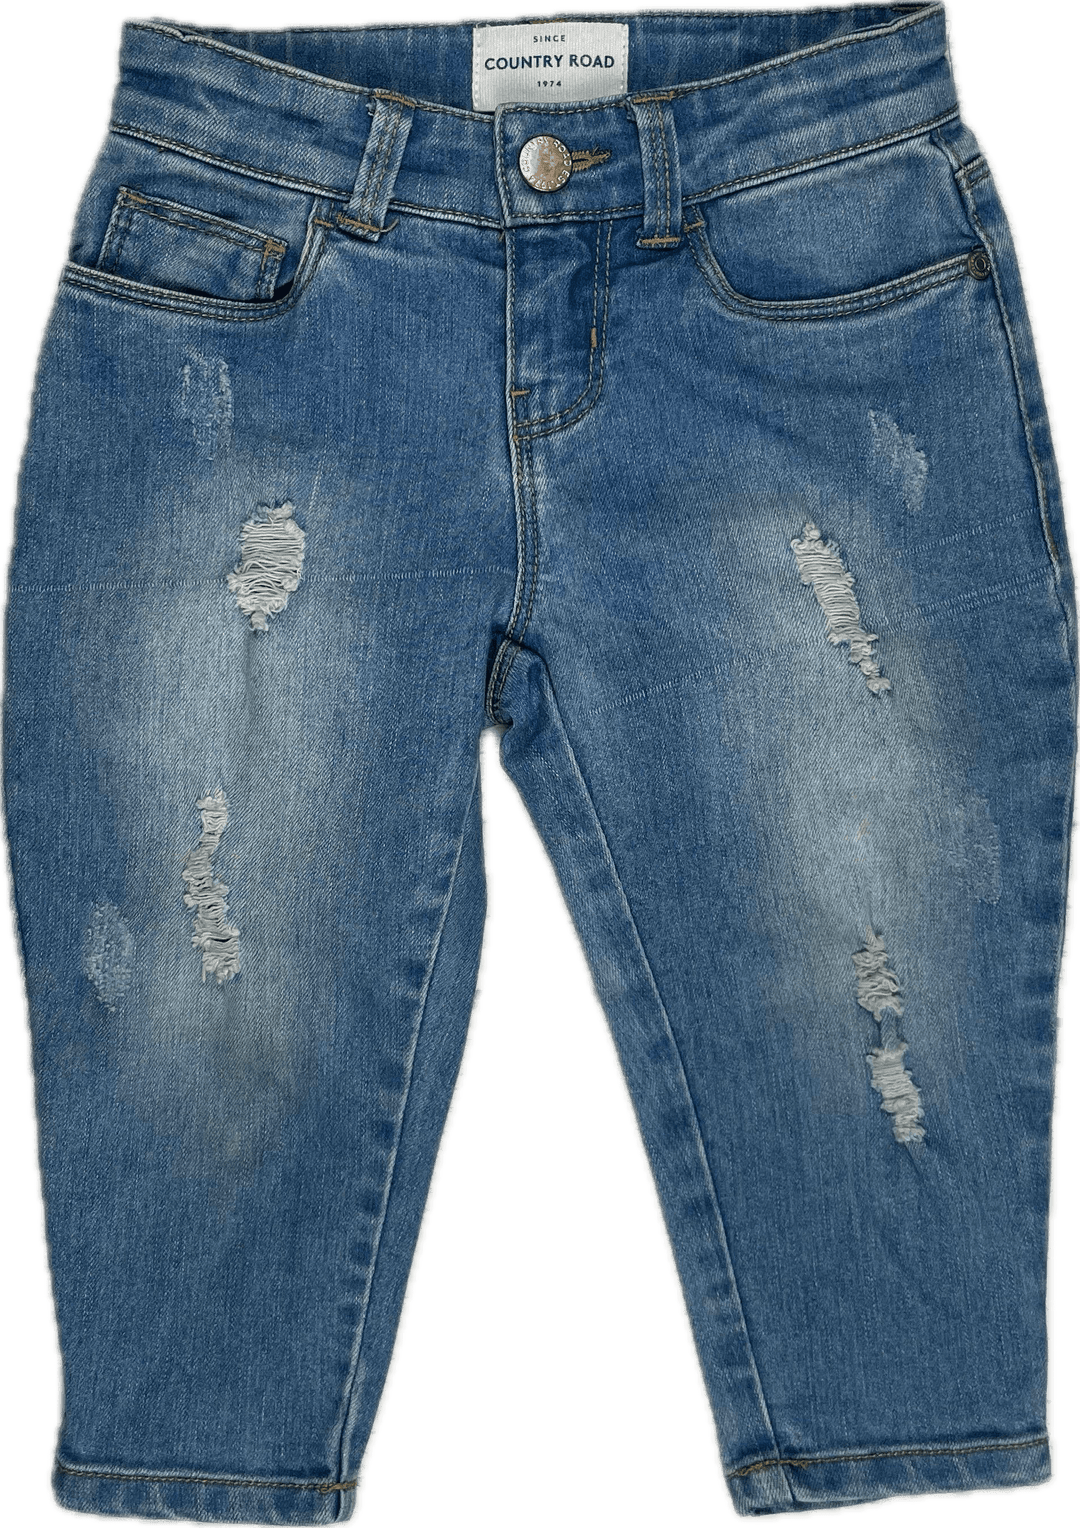 Country Road Tapered Ripped Denim Jeans -Size 2 - Jean Pool